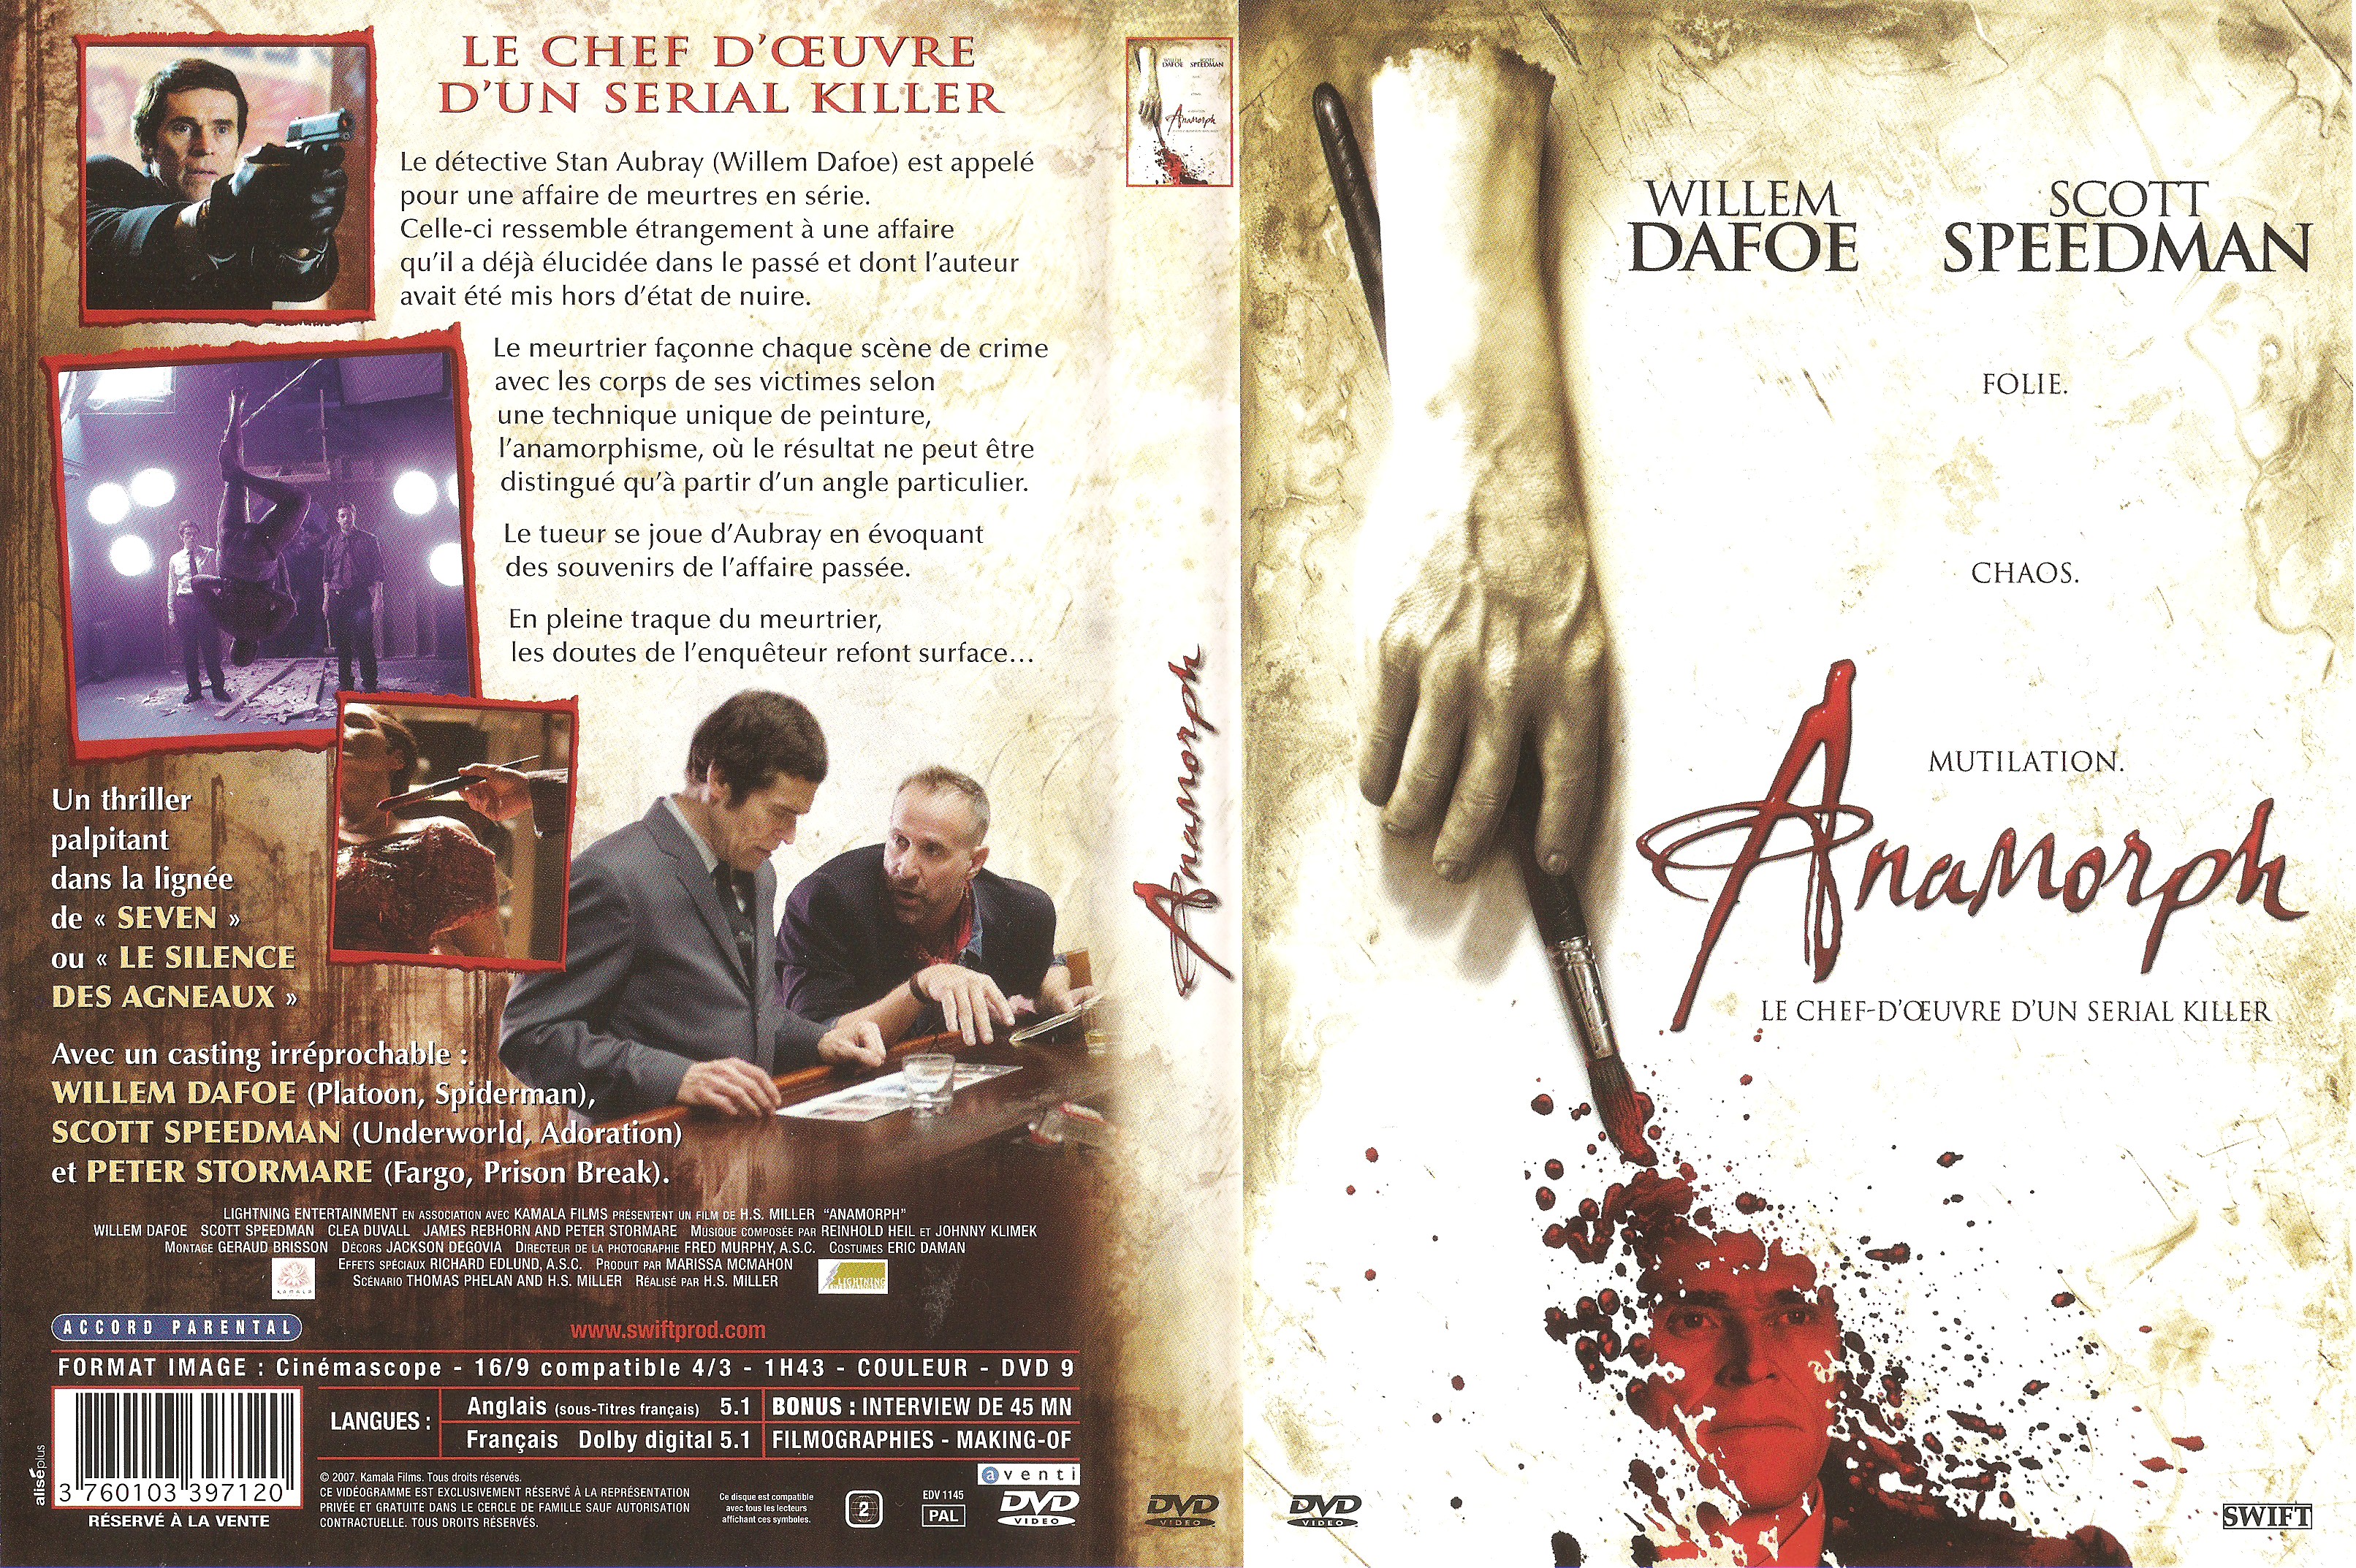 Jaquette DVD Anamorph